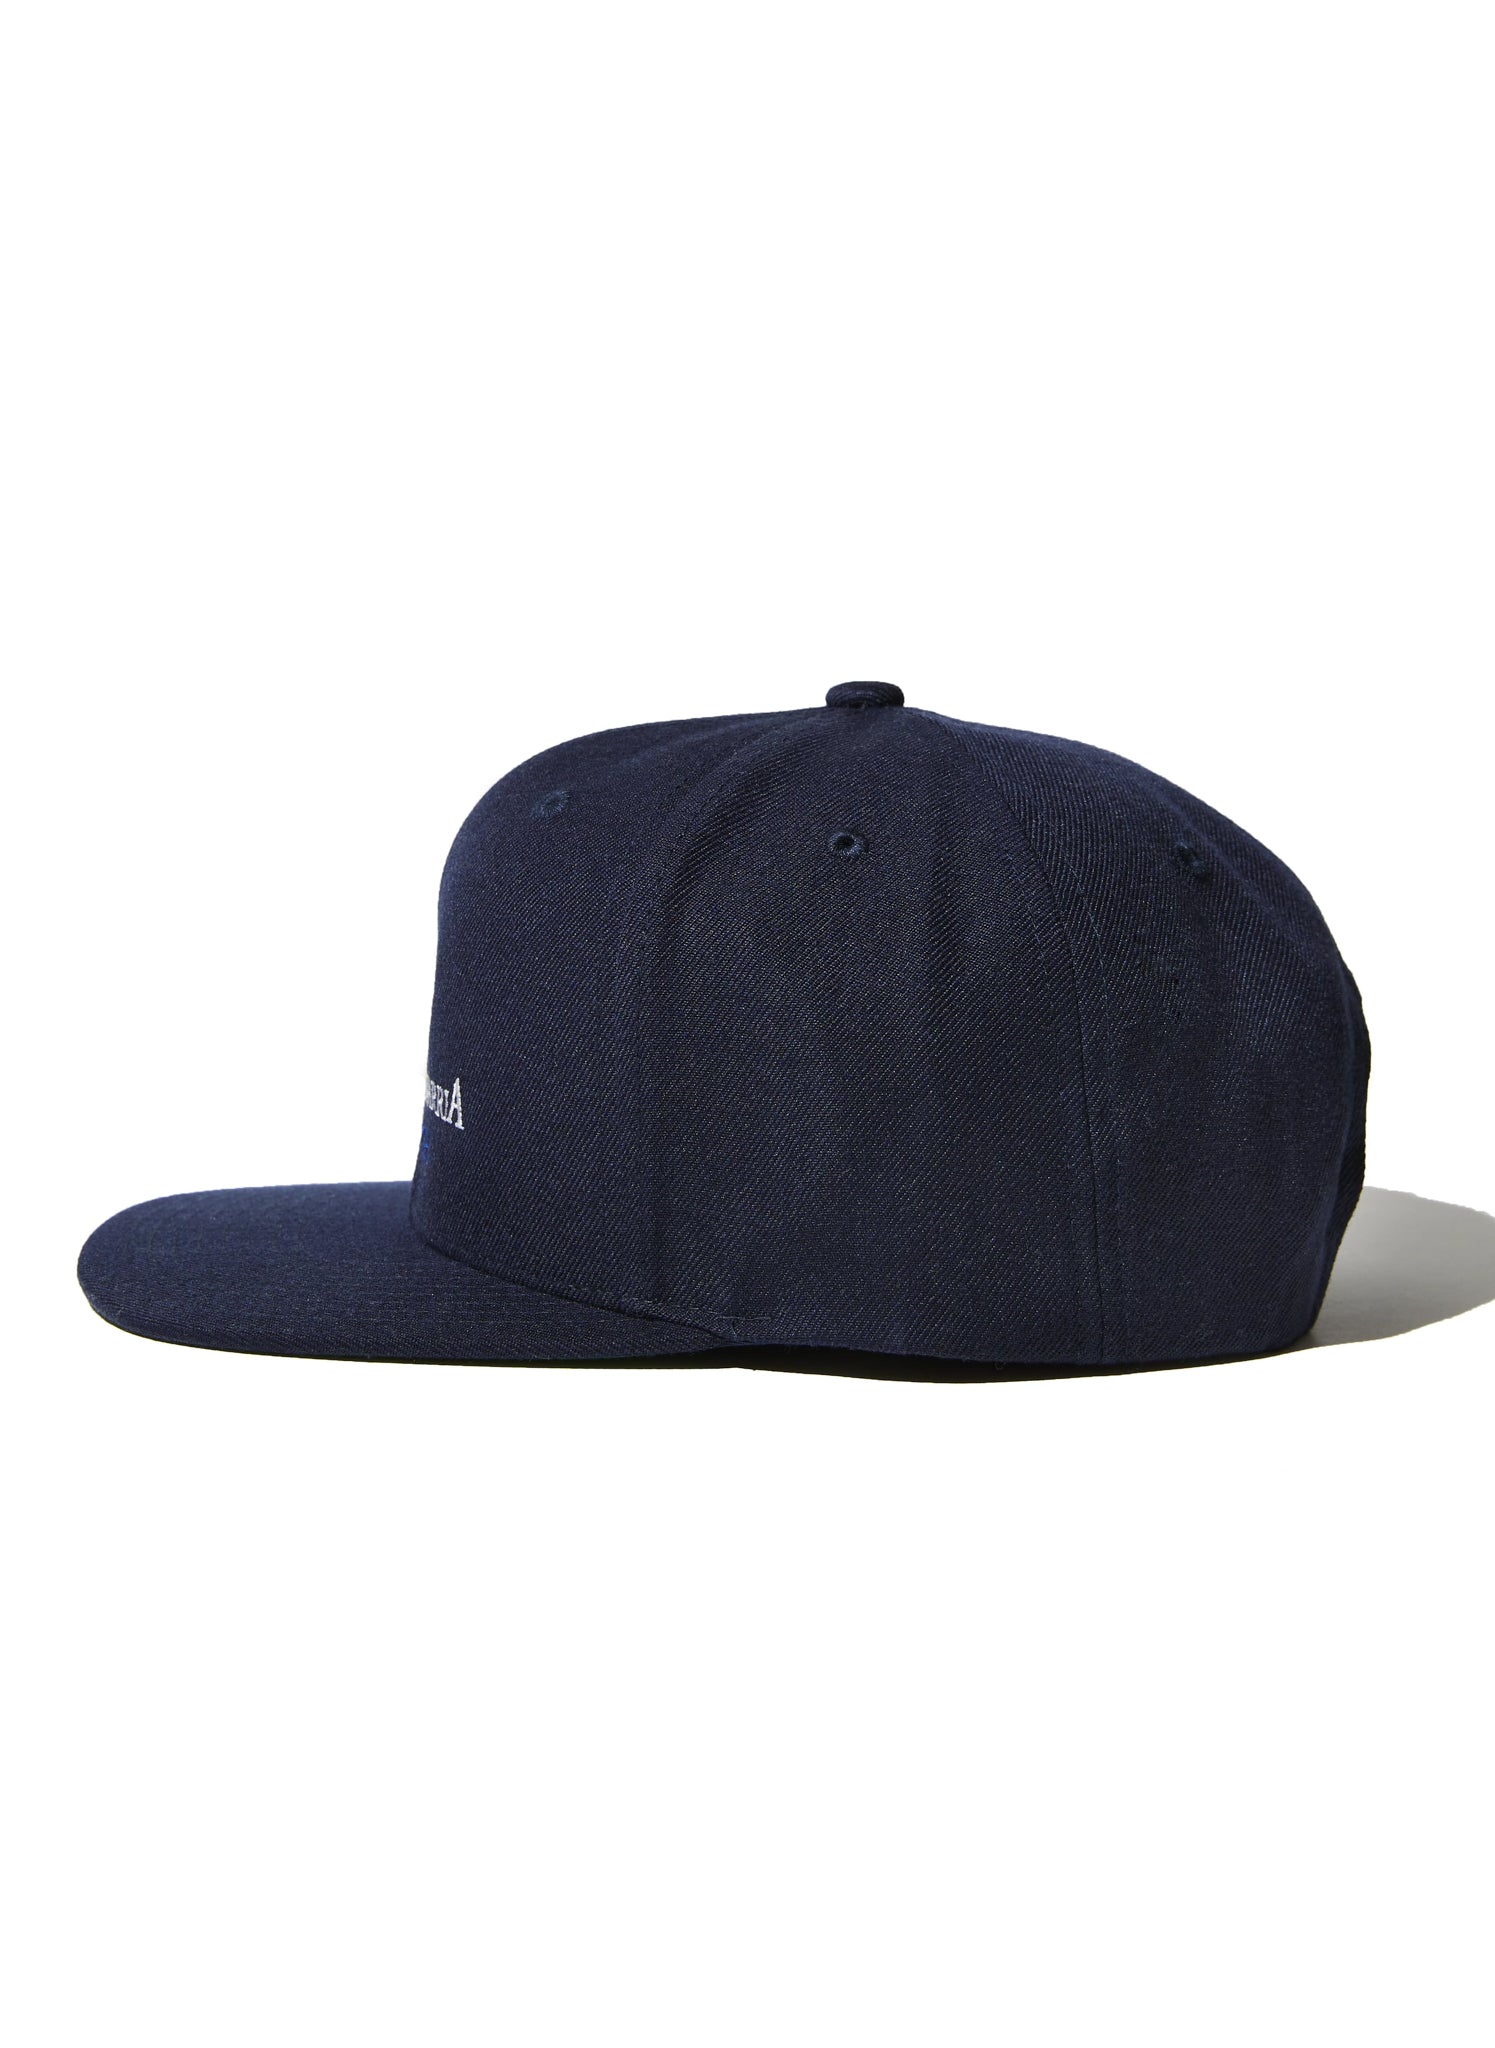 WILLY CHAVARRIA / WILLY CAP 01 NAVY